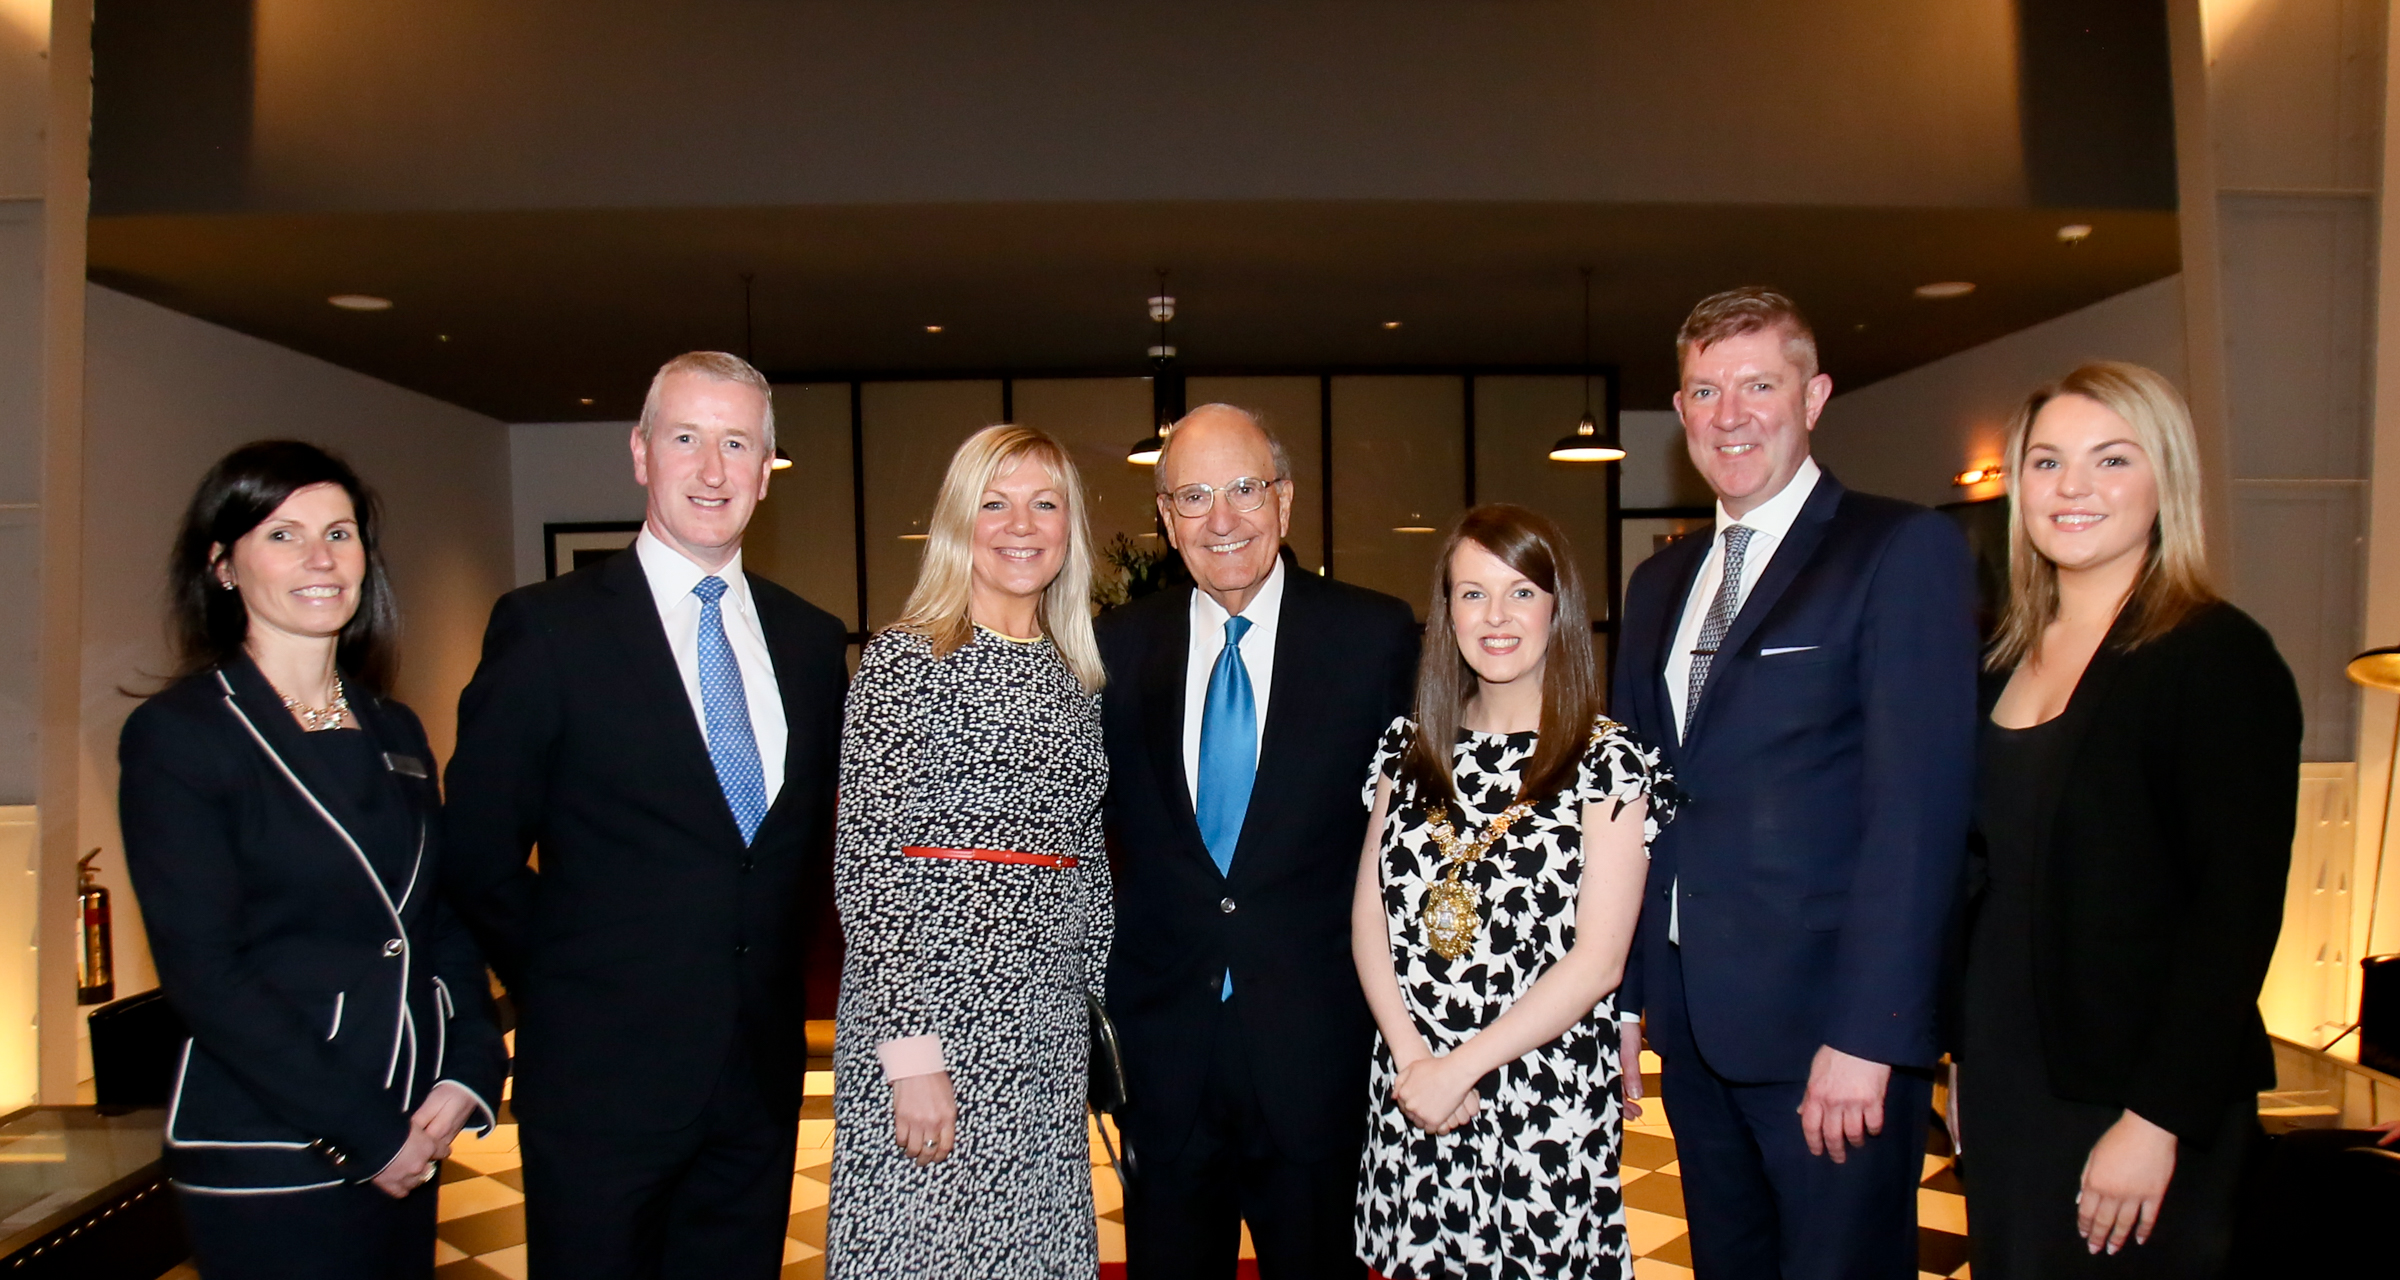  from left, Titanic Hotel Belfast sales manager Yvonne McIlree, Harcourt head of hotels Clement Gaffney, Belfast Council CEO Suzanne Wylie, Senator George Mitchell,&nbsp;the Lord Mayor of Belfast Nuala McAllister, GM Adrian McNally 